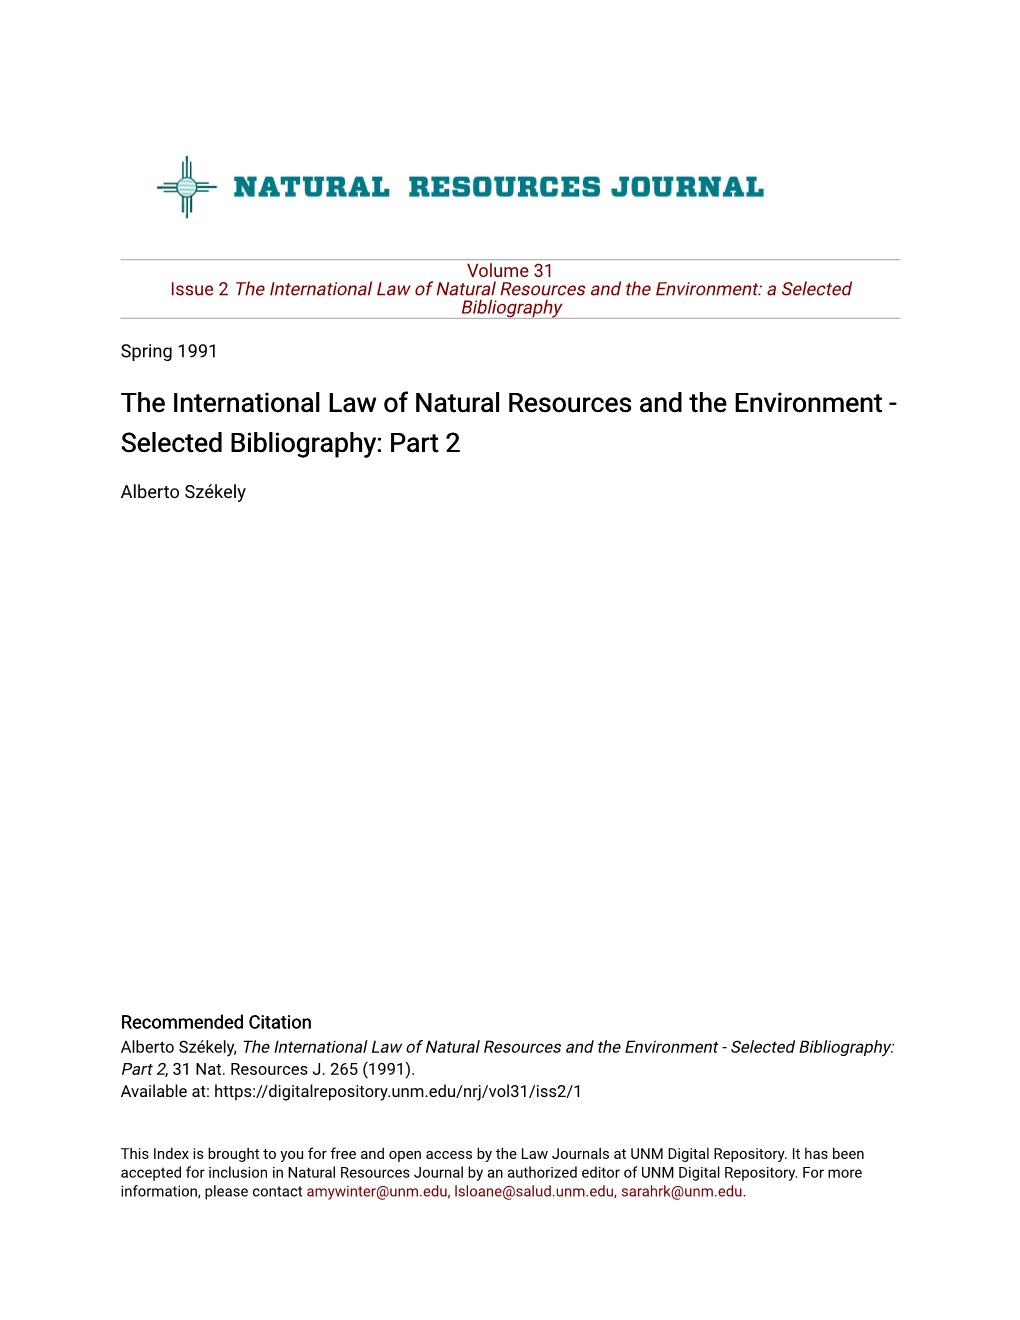 The International Law of Natural Resources and the Environment: a Selected Bibliography